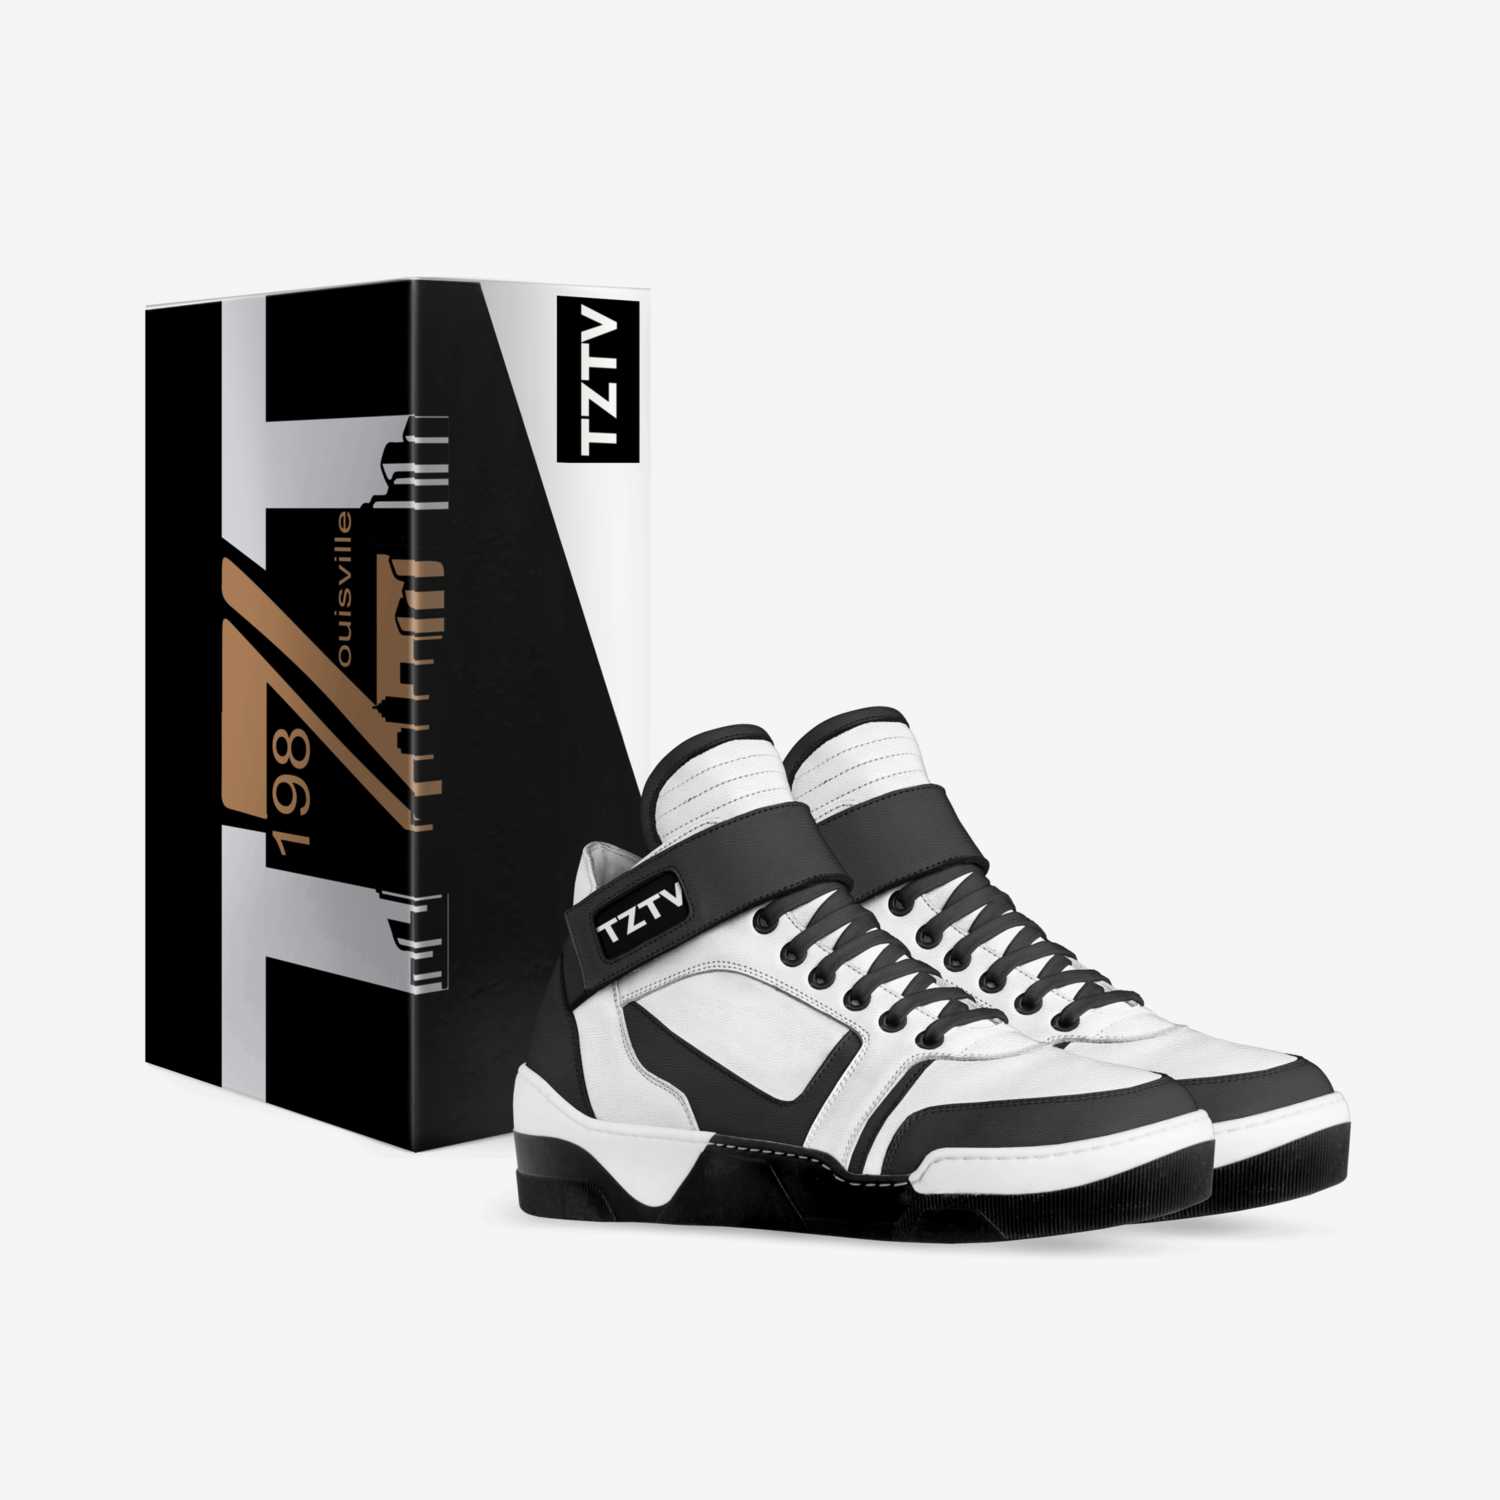 TZT custom made in Italy shoes by Tzt Ent | Box view